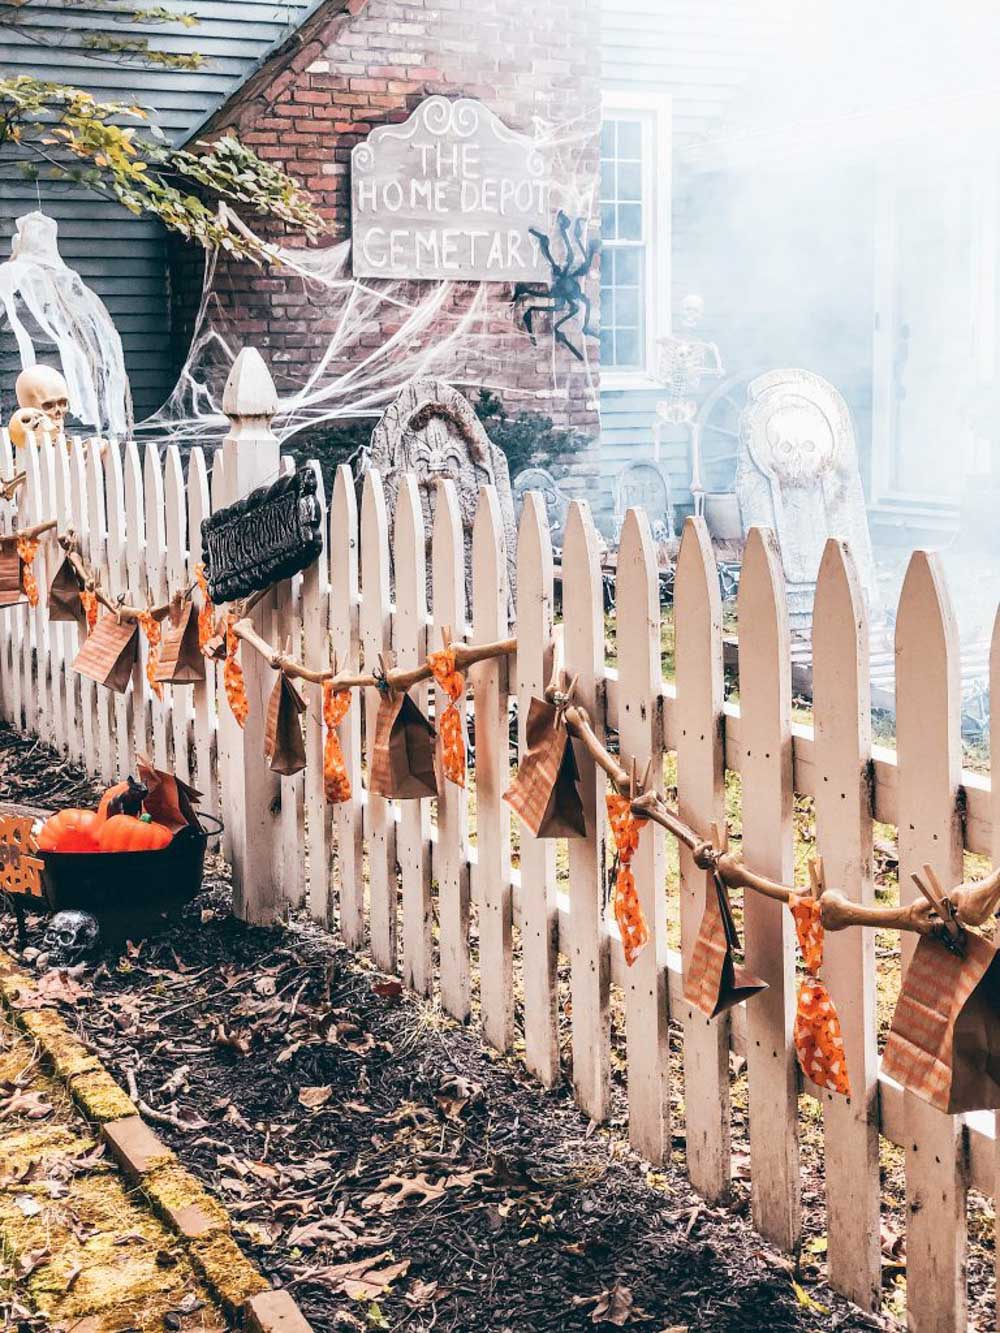 A fence decorated for Halloween with trick-or-treat bags.